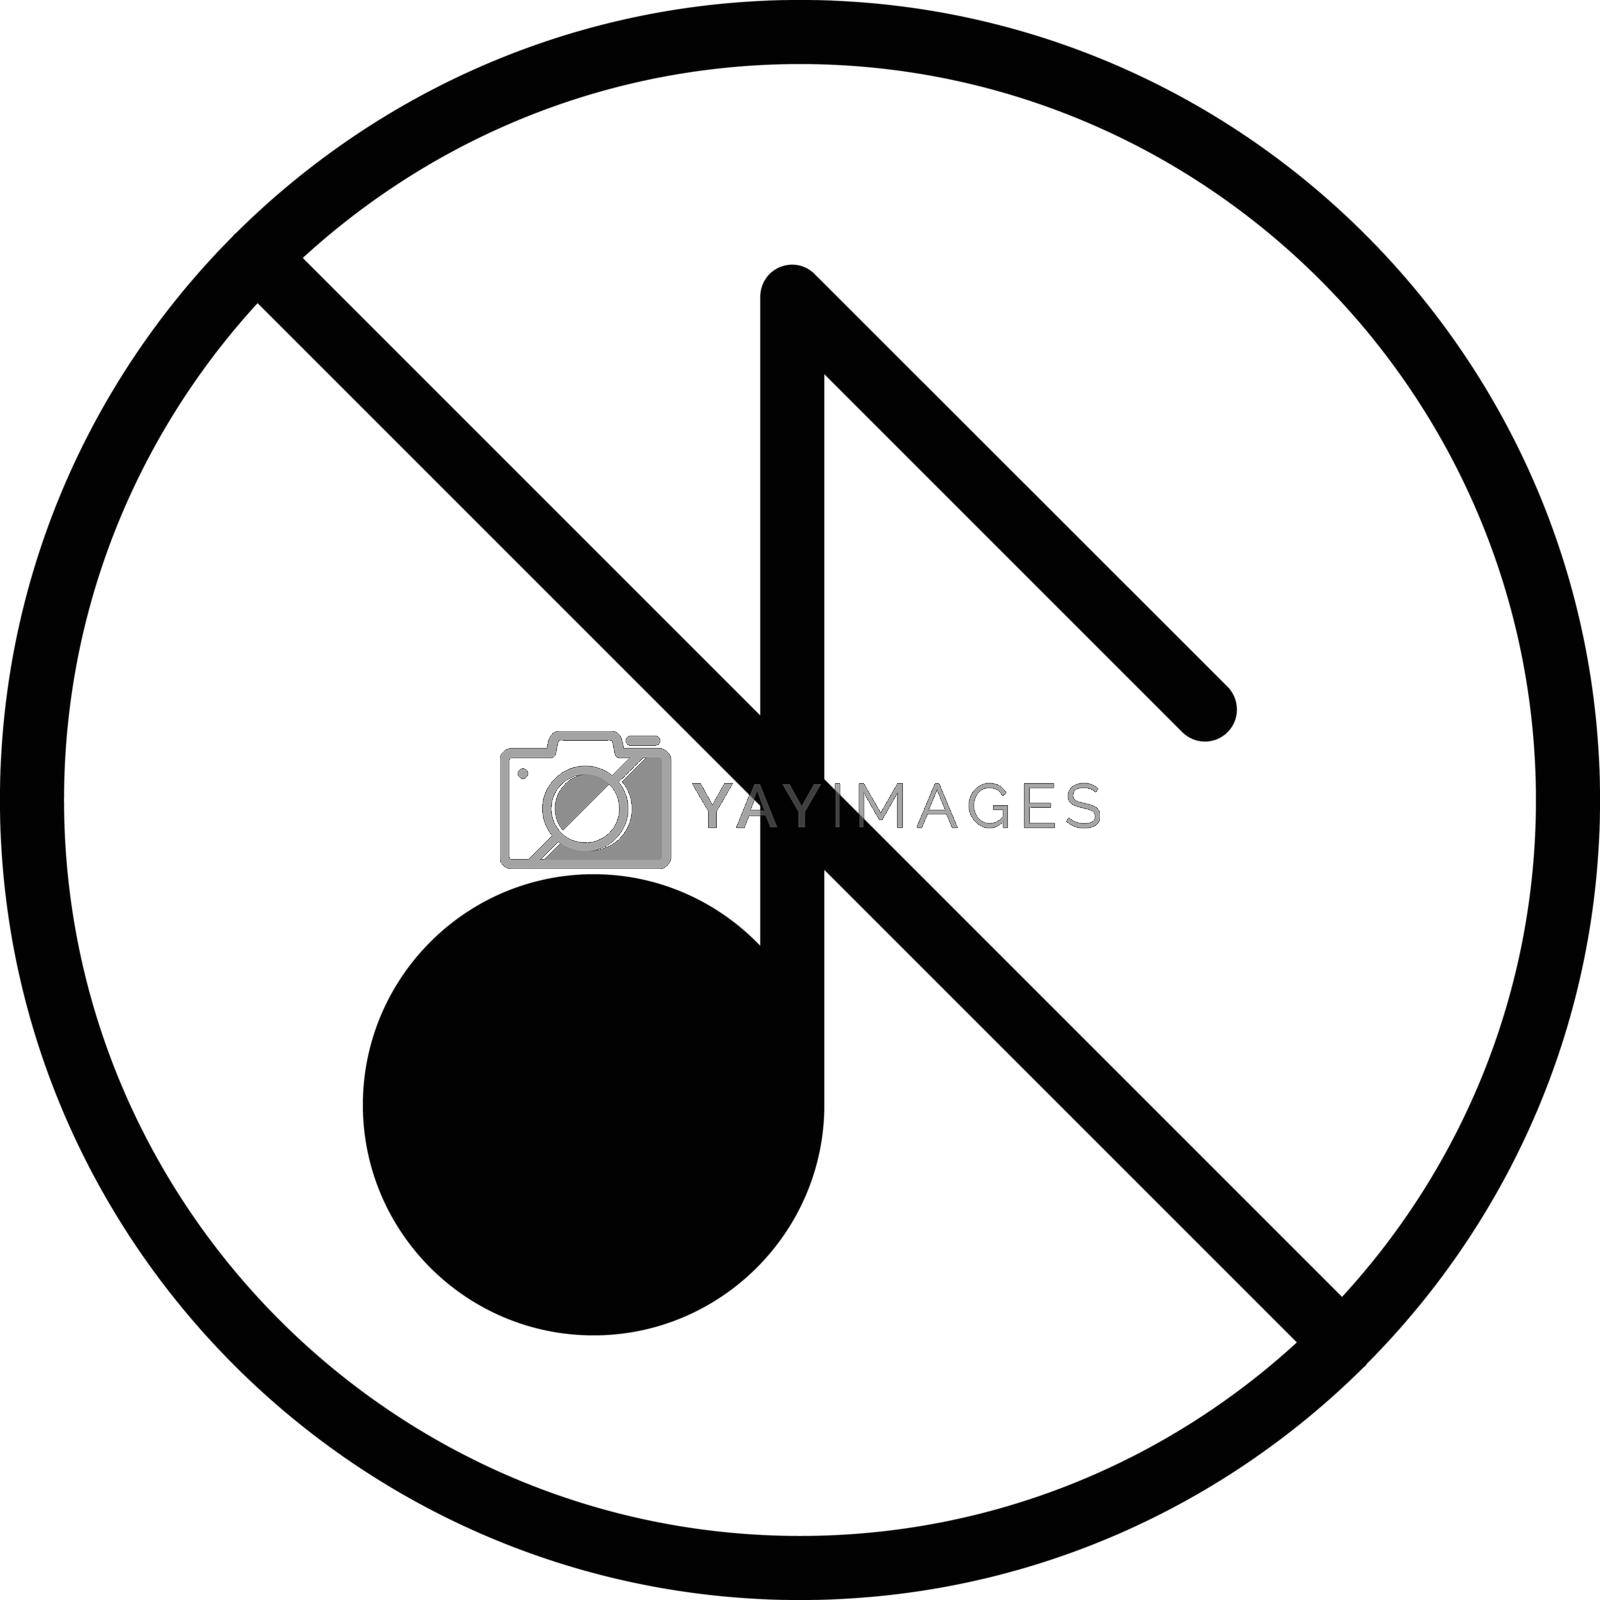 Royalty free image of not allowed by vectorstall